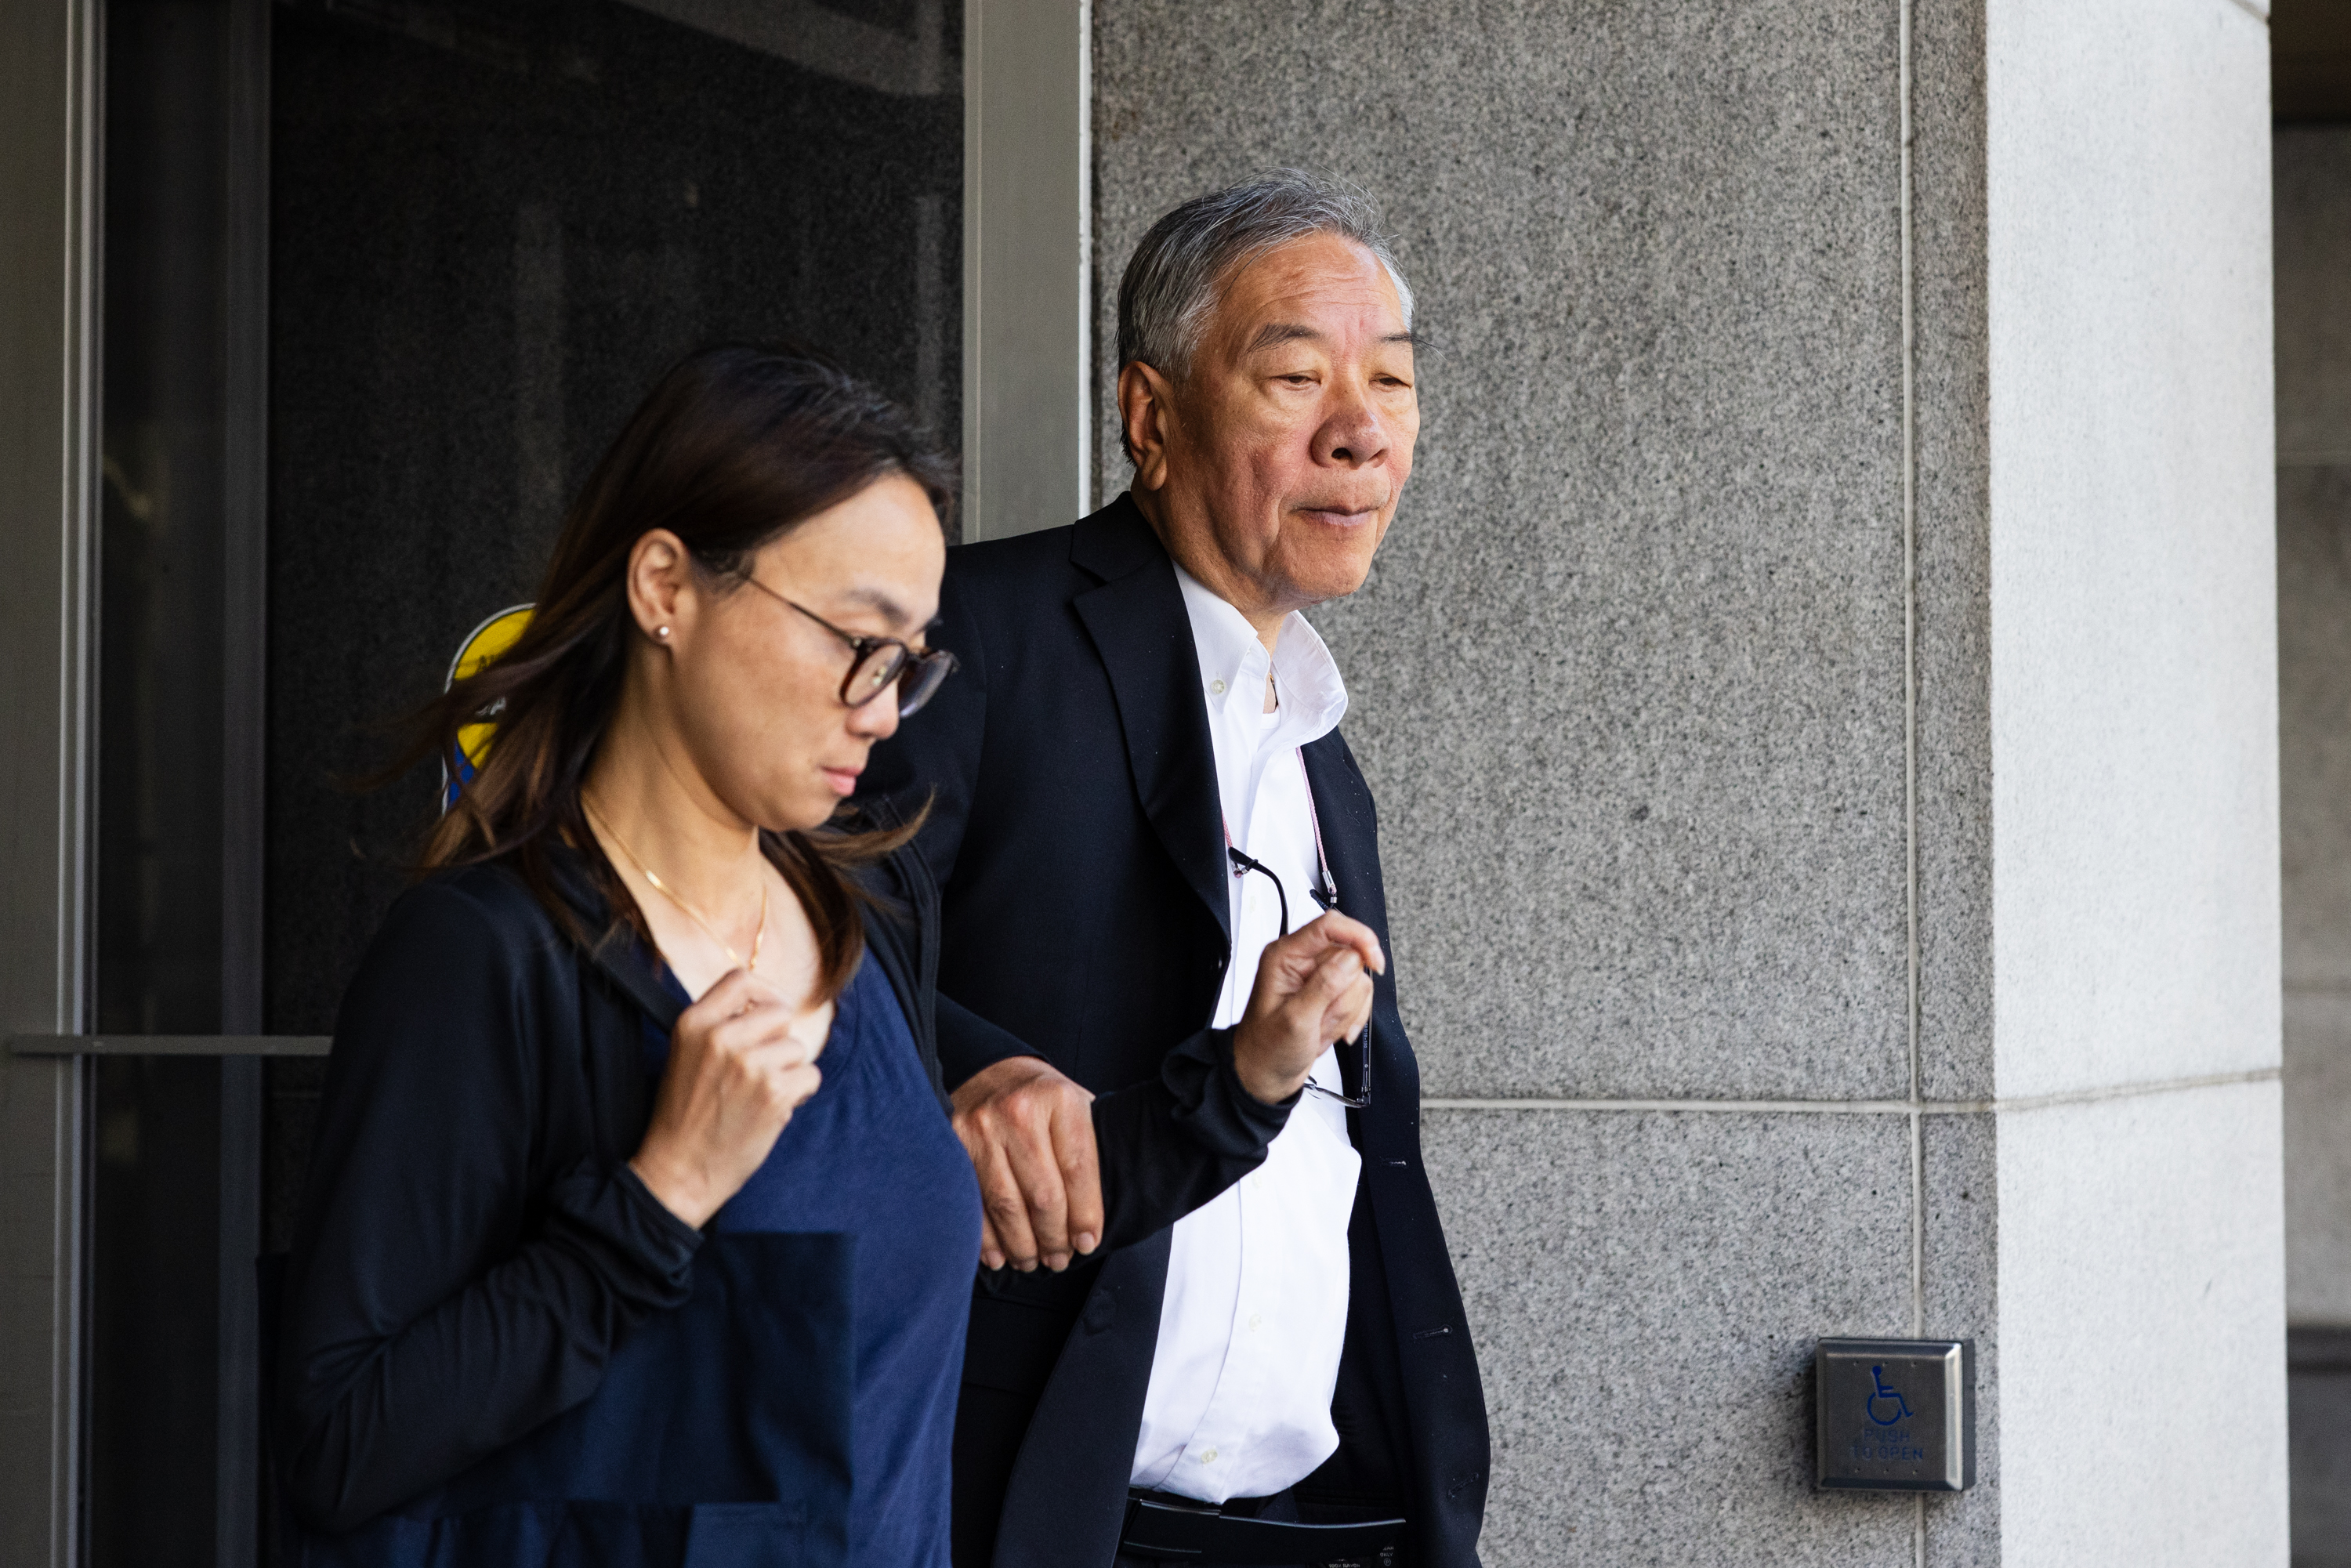 Walter Wong exits the court house with an unknown person.